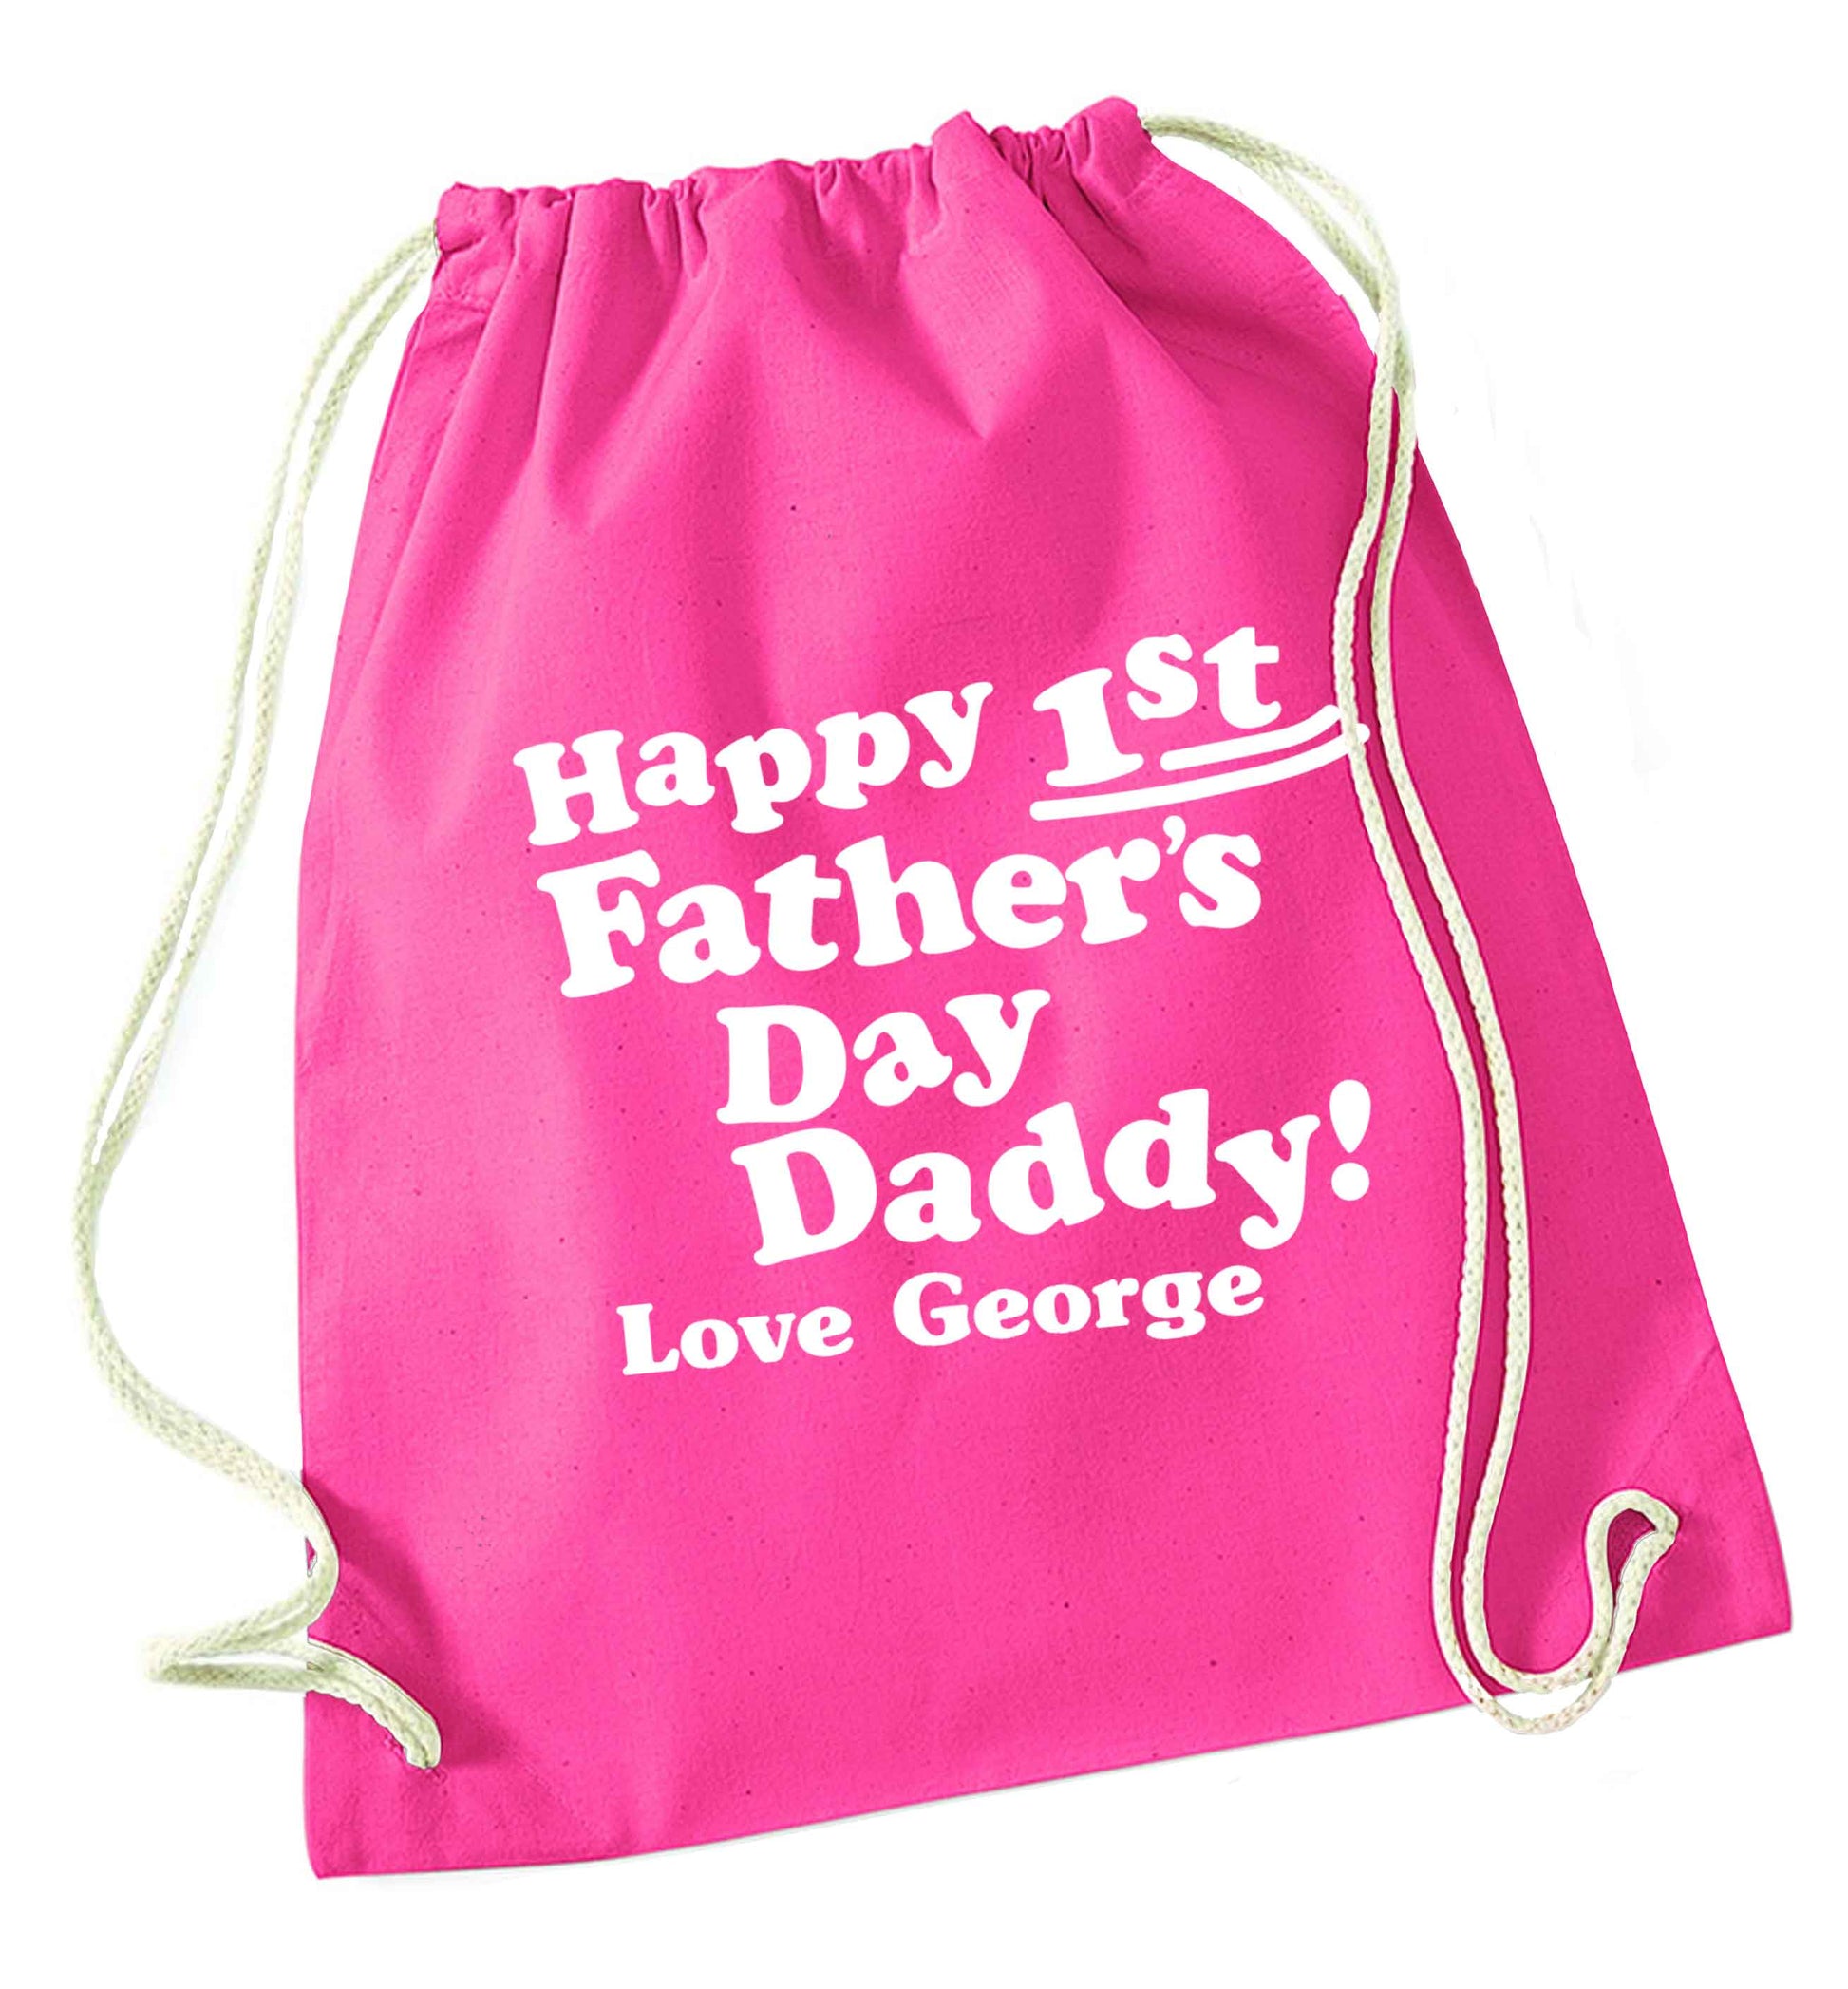 Happy first Fathers Day daddy love personalised pink drawstring bag